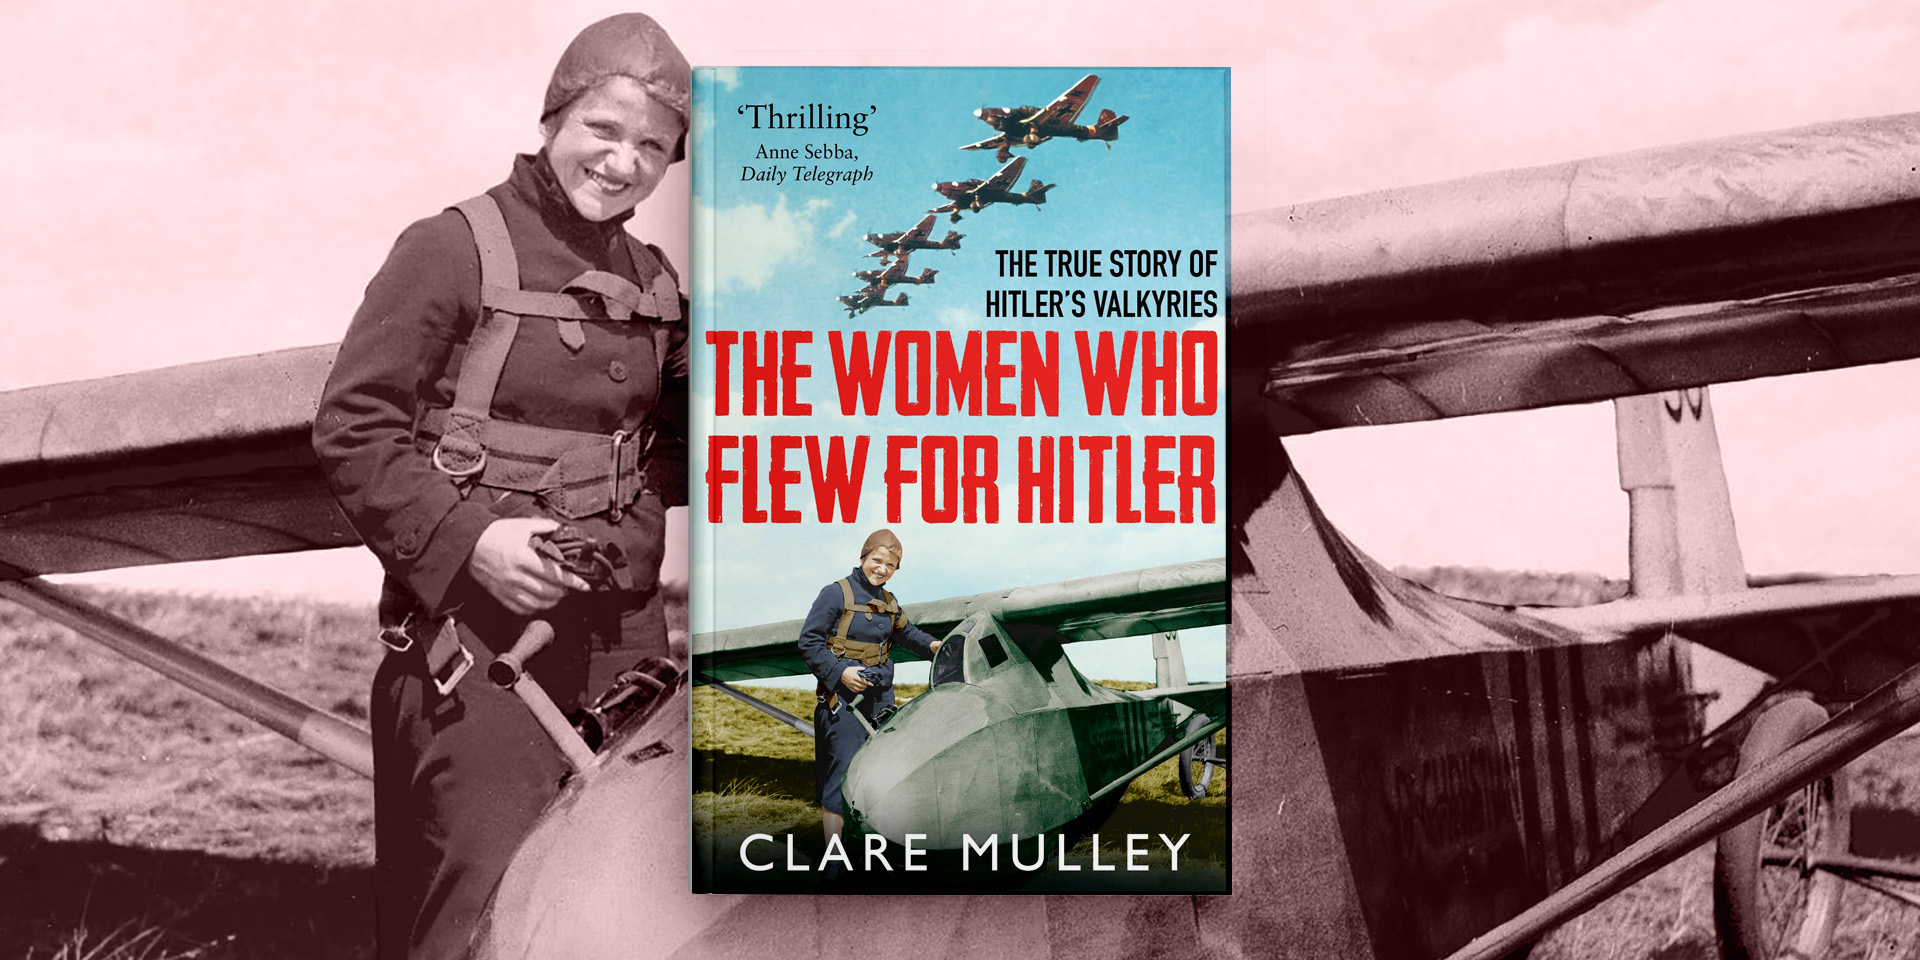 'The Women Who Flew for Hitler' book cover